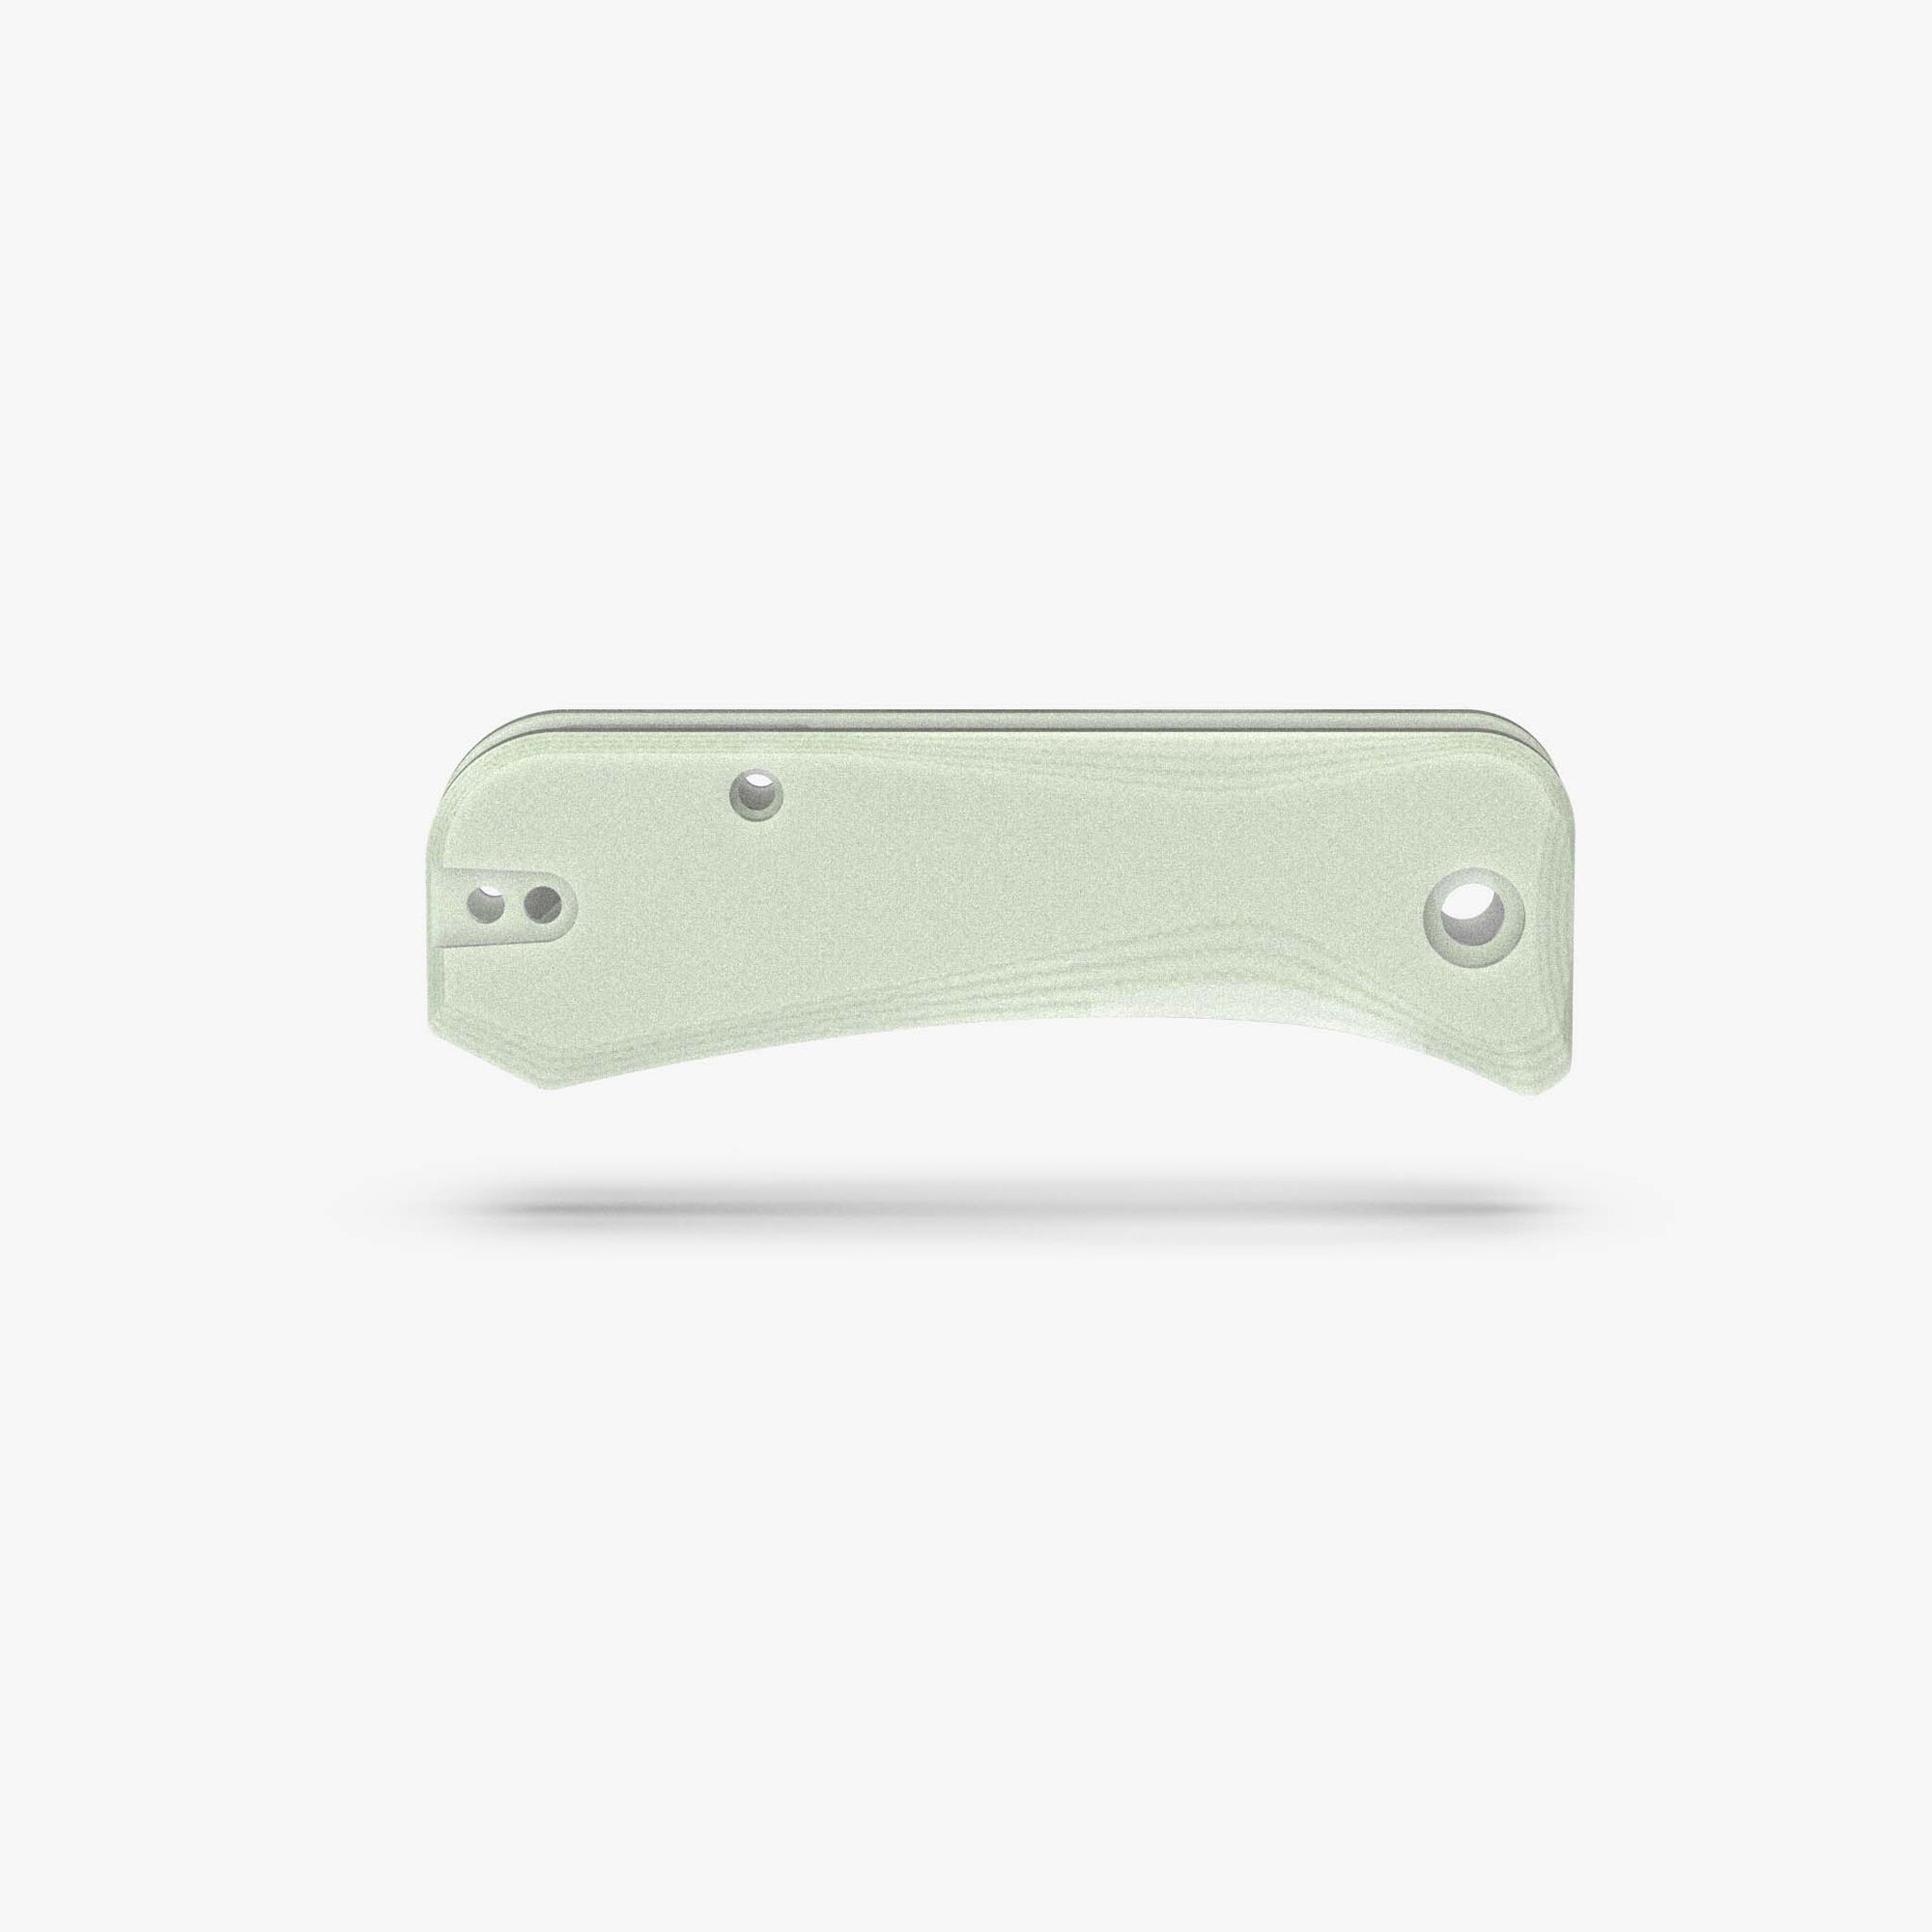 Groove G-10 Scales for WE Banter Knife